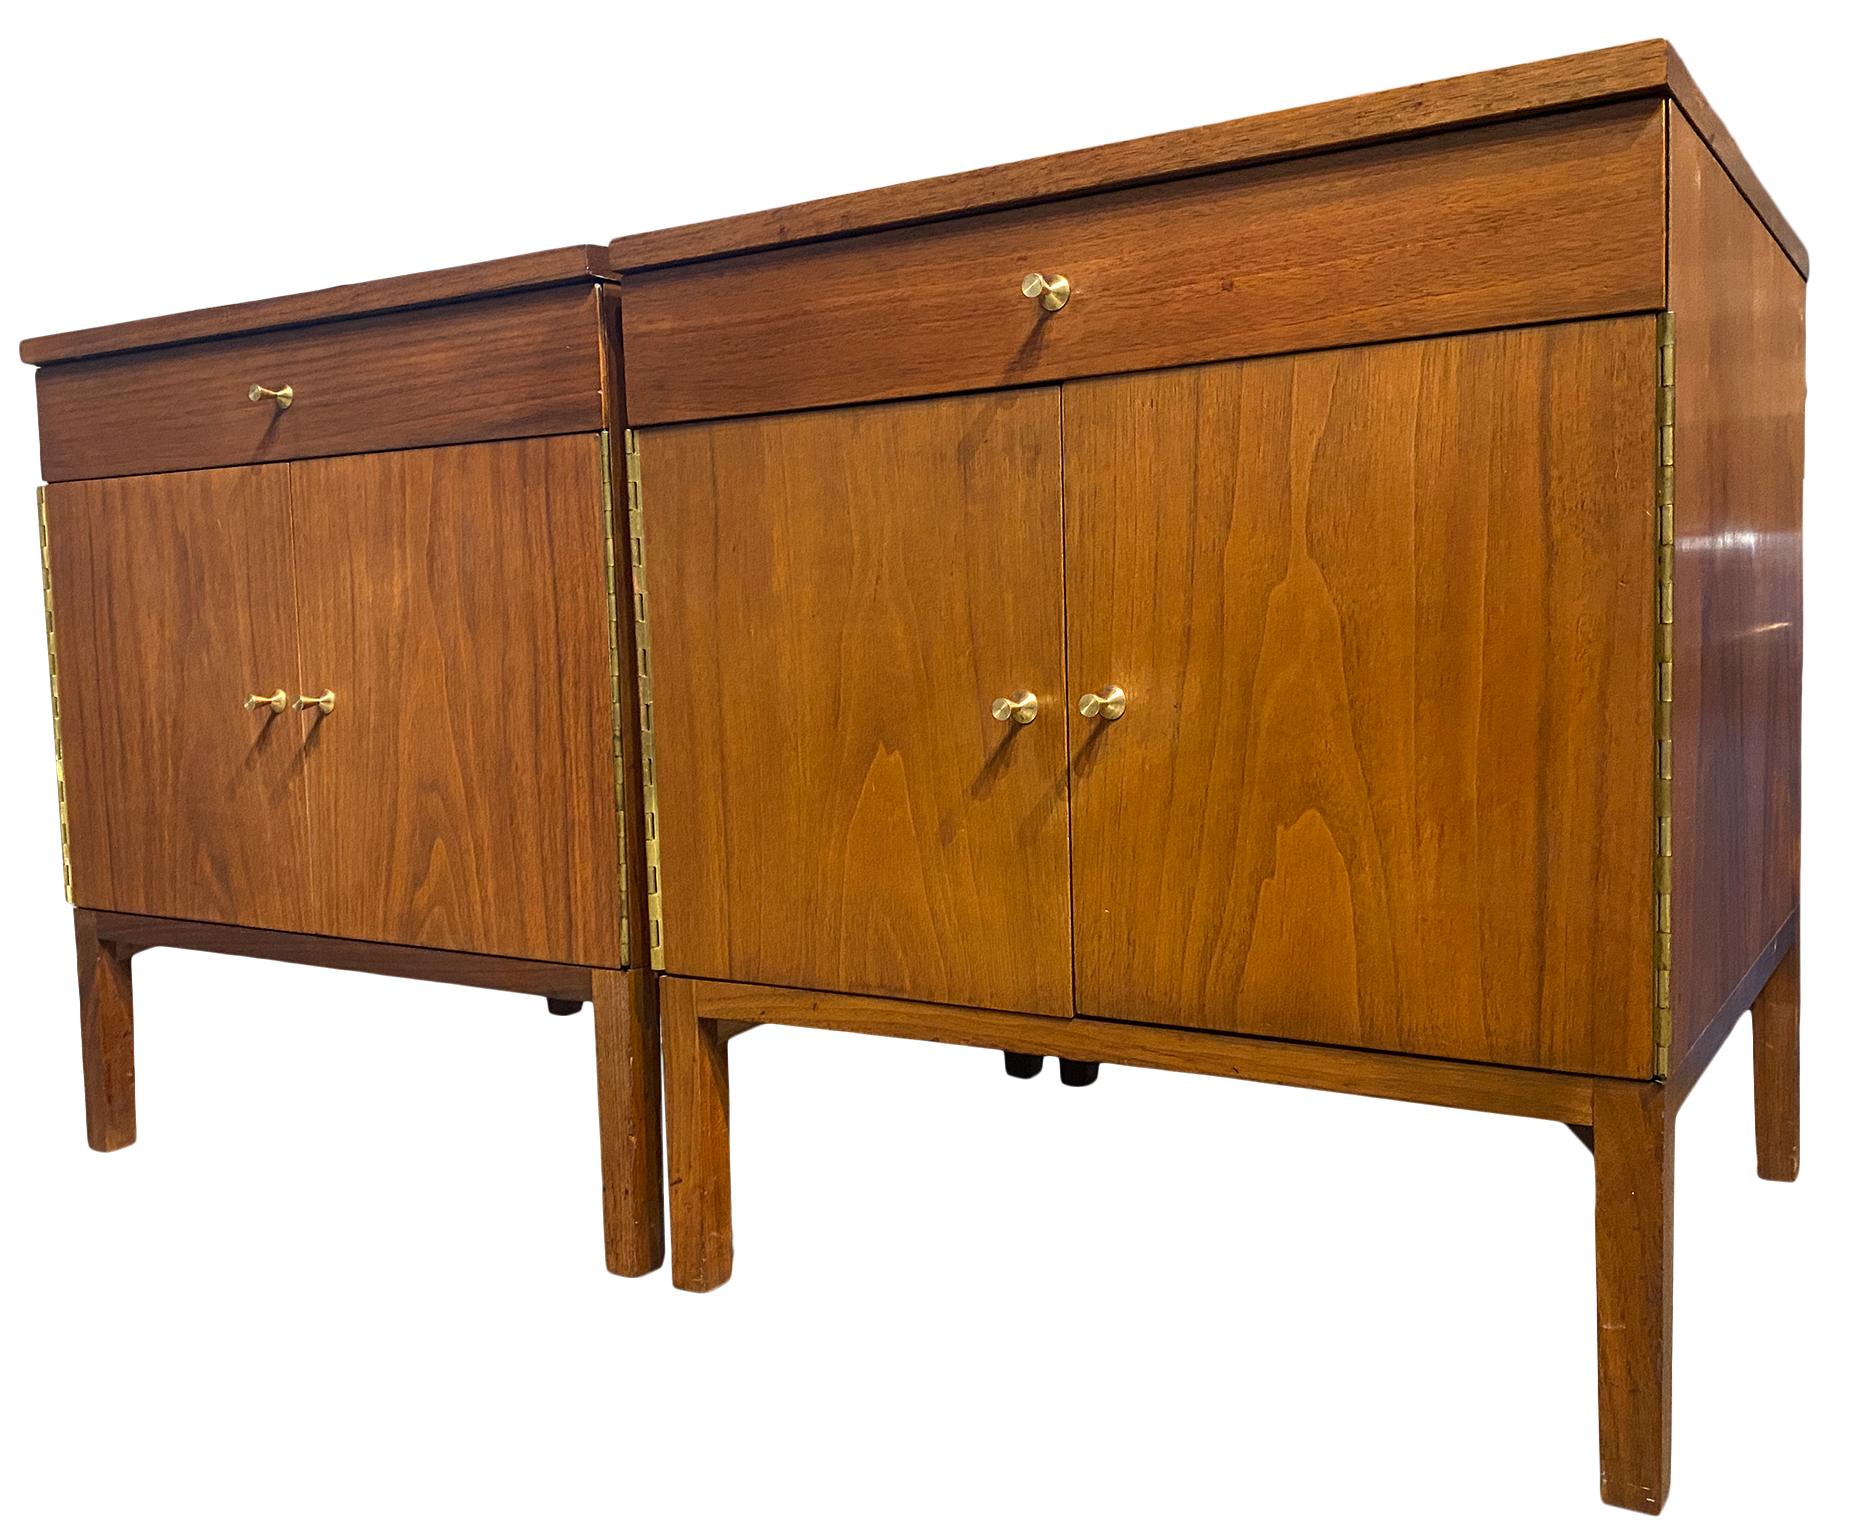 Midcentury American designer Paul McCobb pair of nightstands small cabinets solid walnut. Original finish in beautiful vintage condition - Has (1) top drawer and (2) lower front cabinet doors - solid walnut base with solid 4 legs. All top drawers